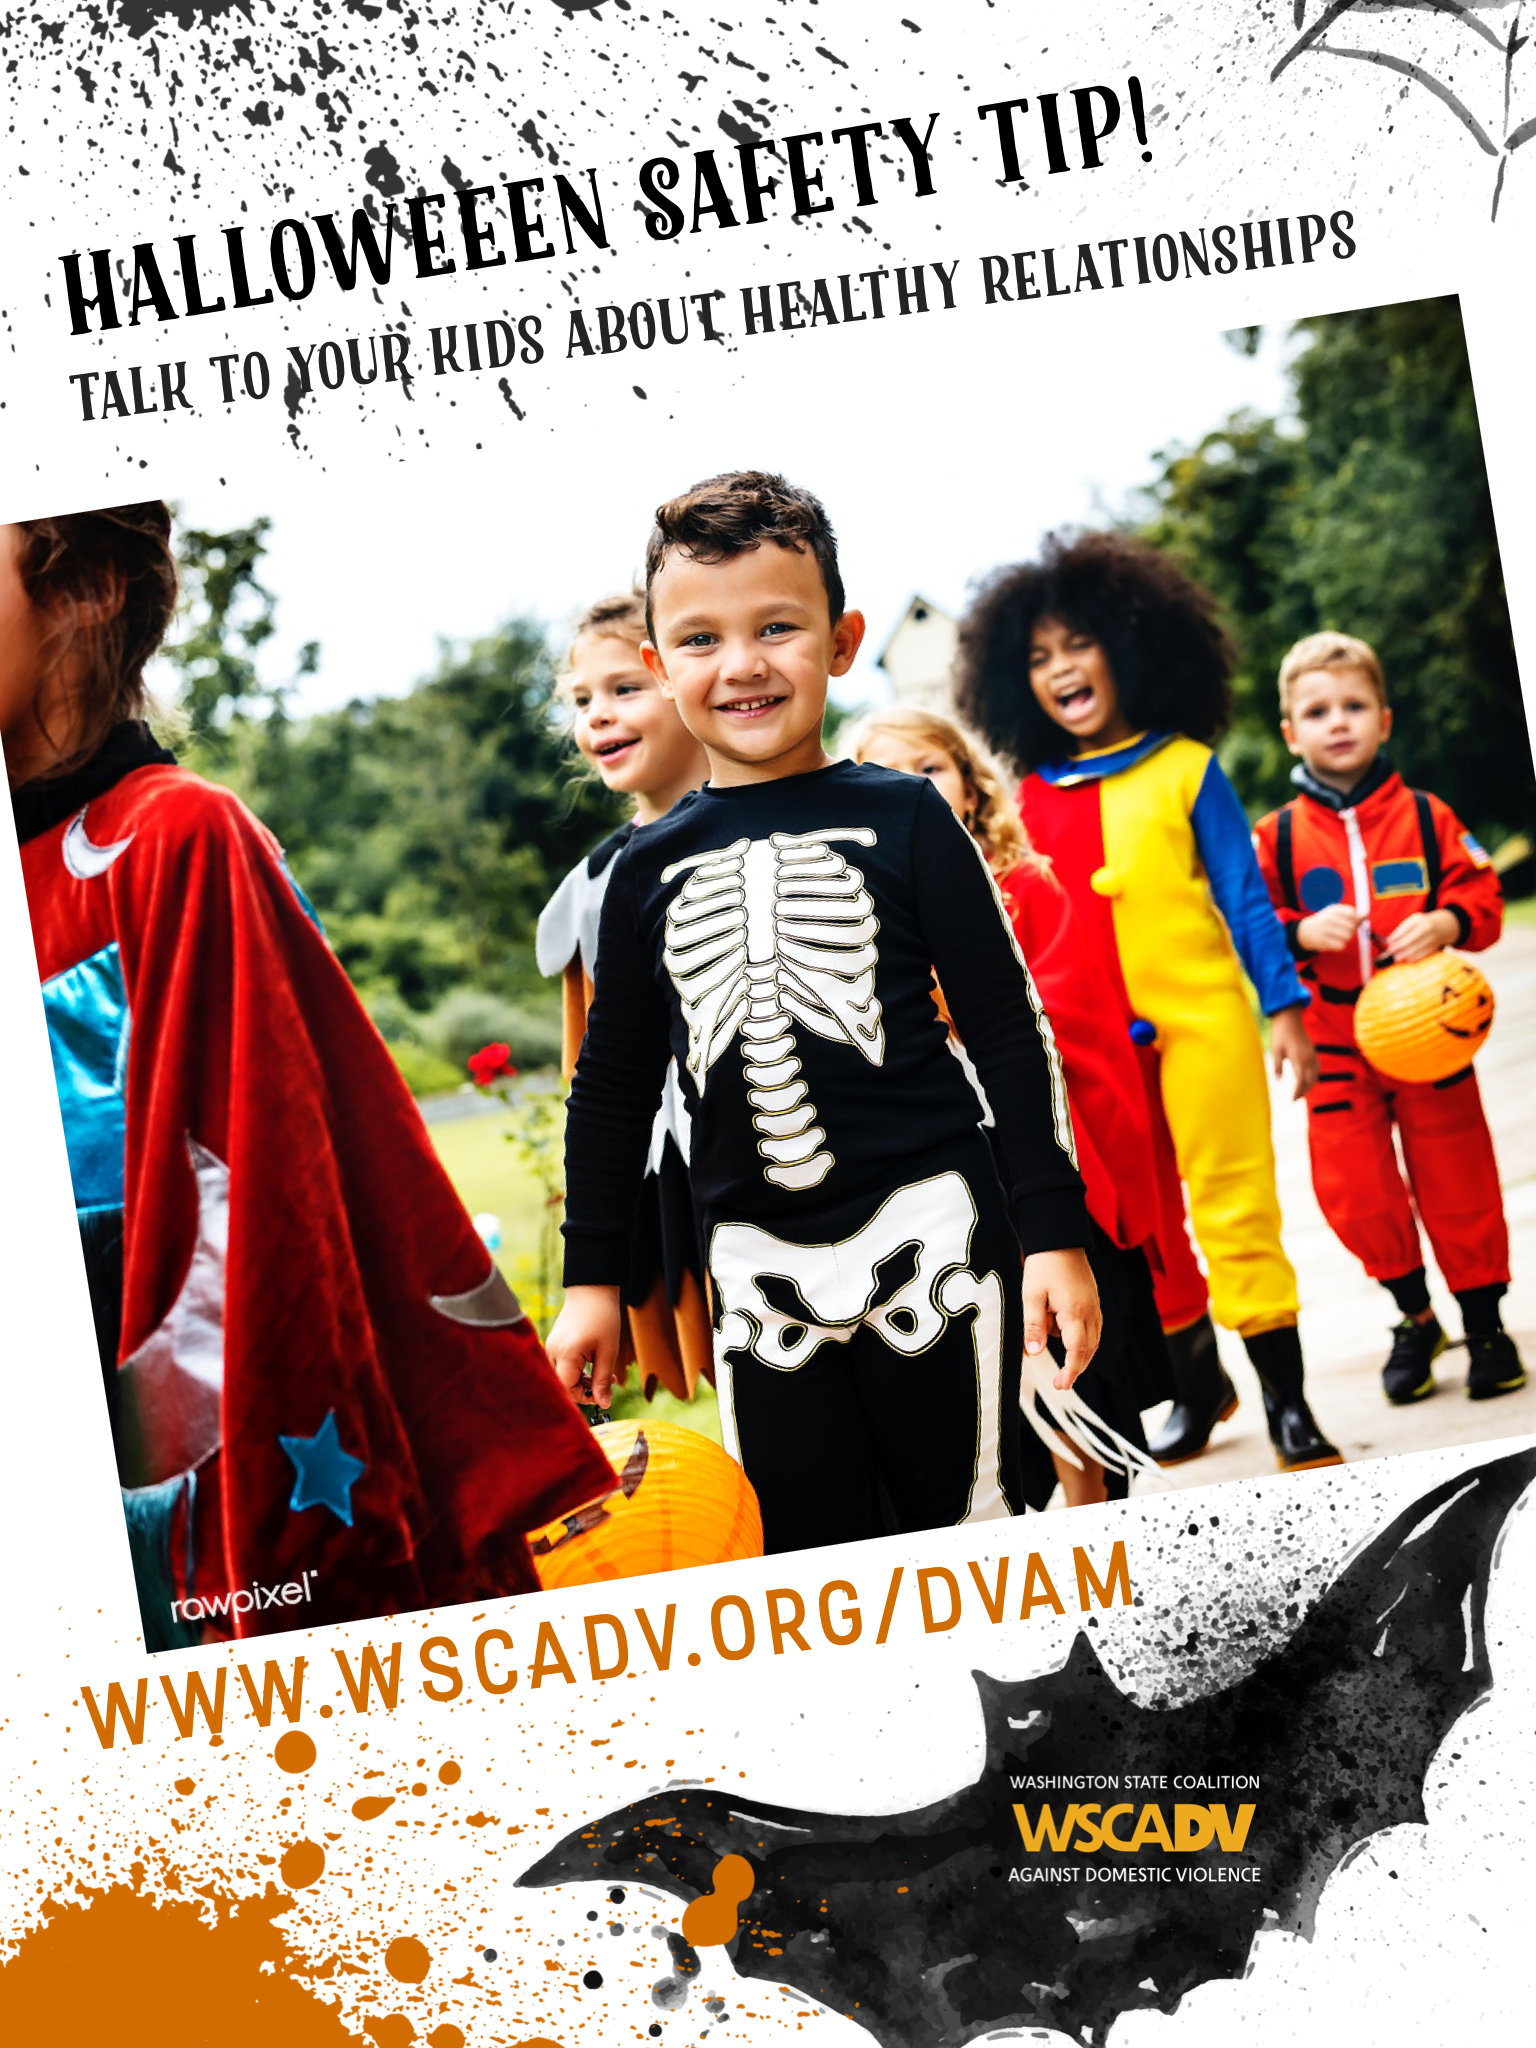 Halloween themed image for Domestic Violence Action Month. There is a photo of a group of children in halloween costumes smiling as they trick or treat. Above the photo is text that reads: Halloween safety tip! Talk to your kids about healthy relationships! Underneath the photo is a bat and the url www.wscadv.org/dvam